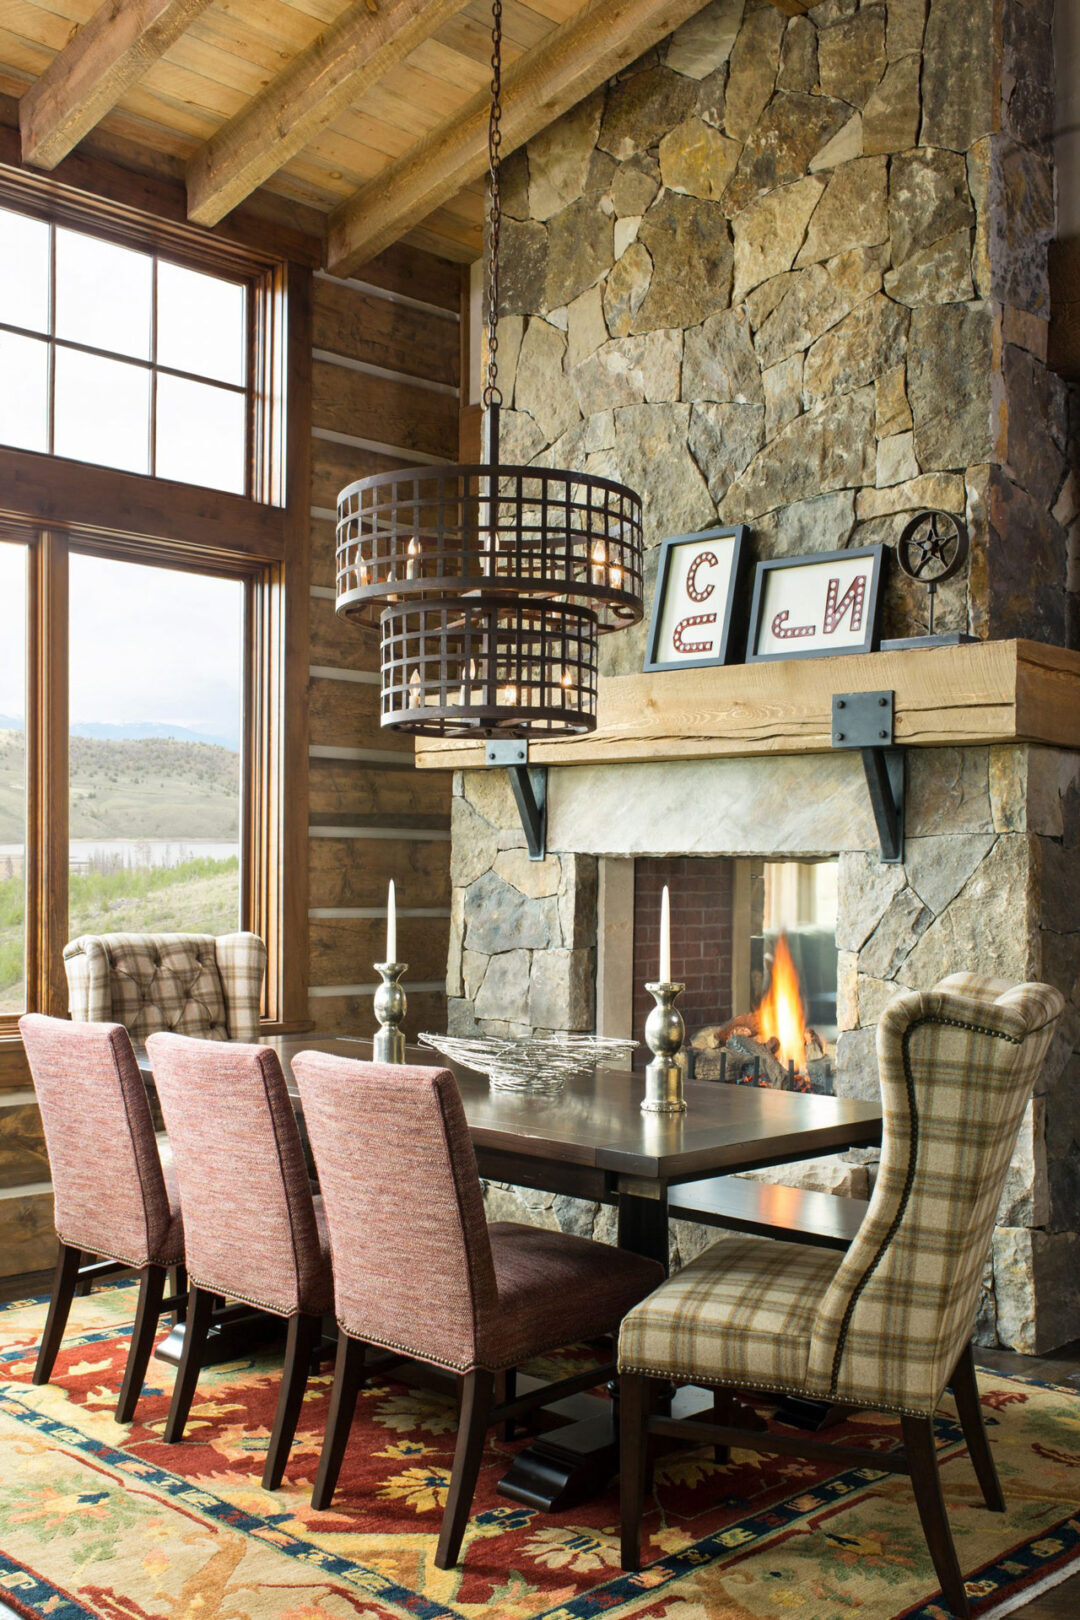 Rustic Mountain Dining Room with Stately Stone Covered Fireplace and Playful Plaid Upholstery